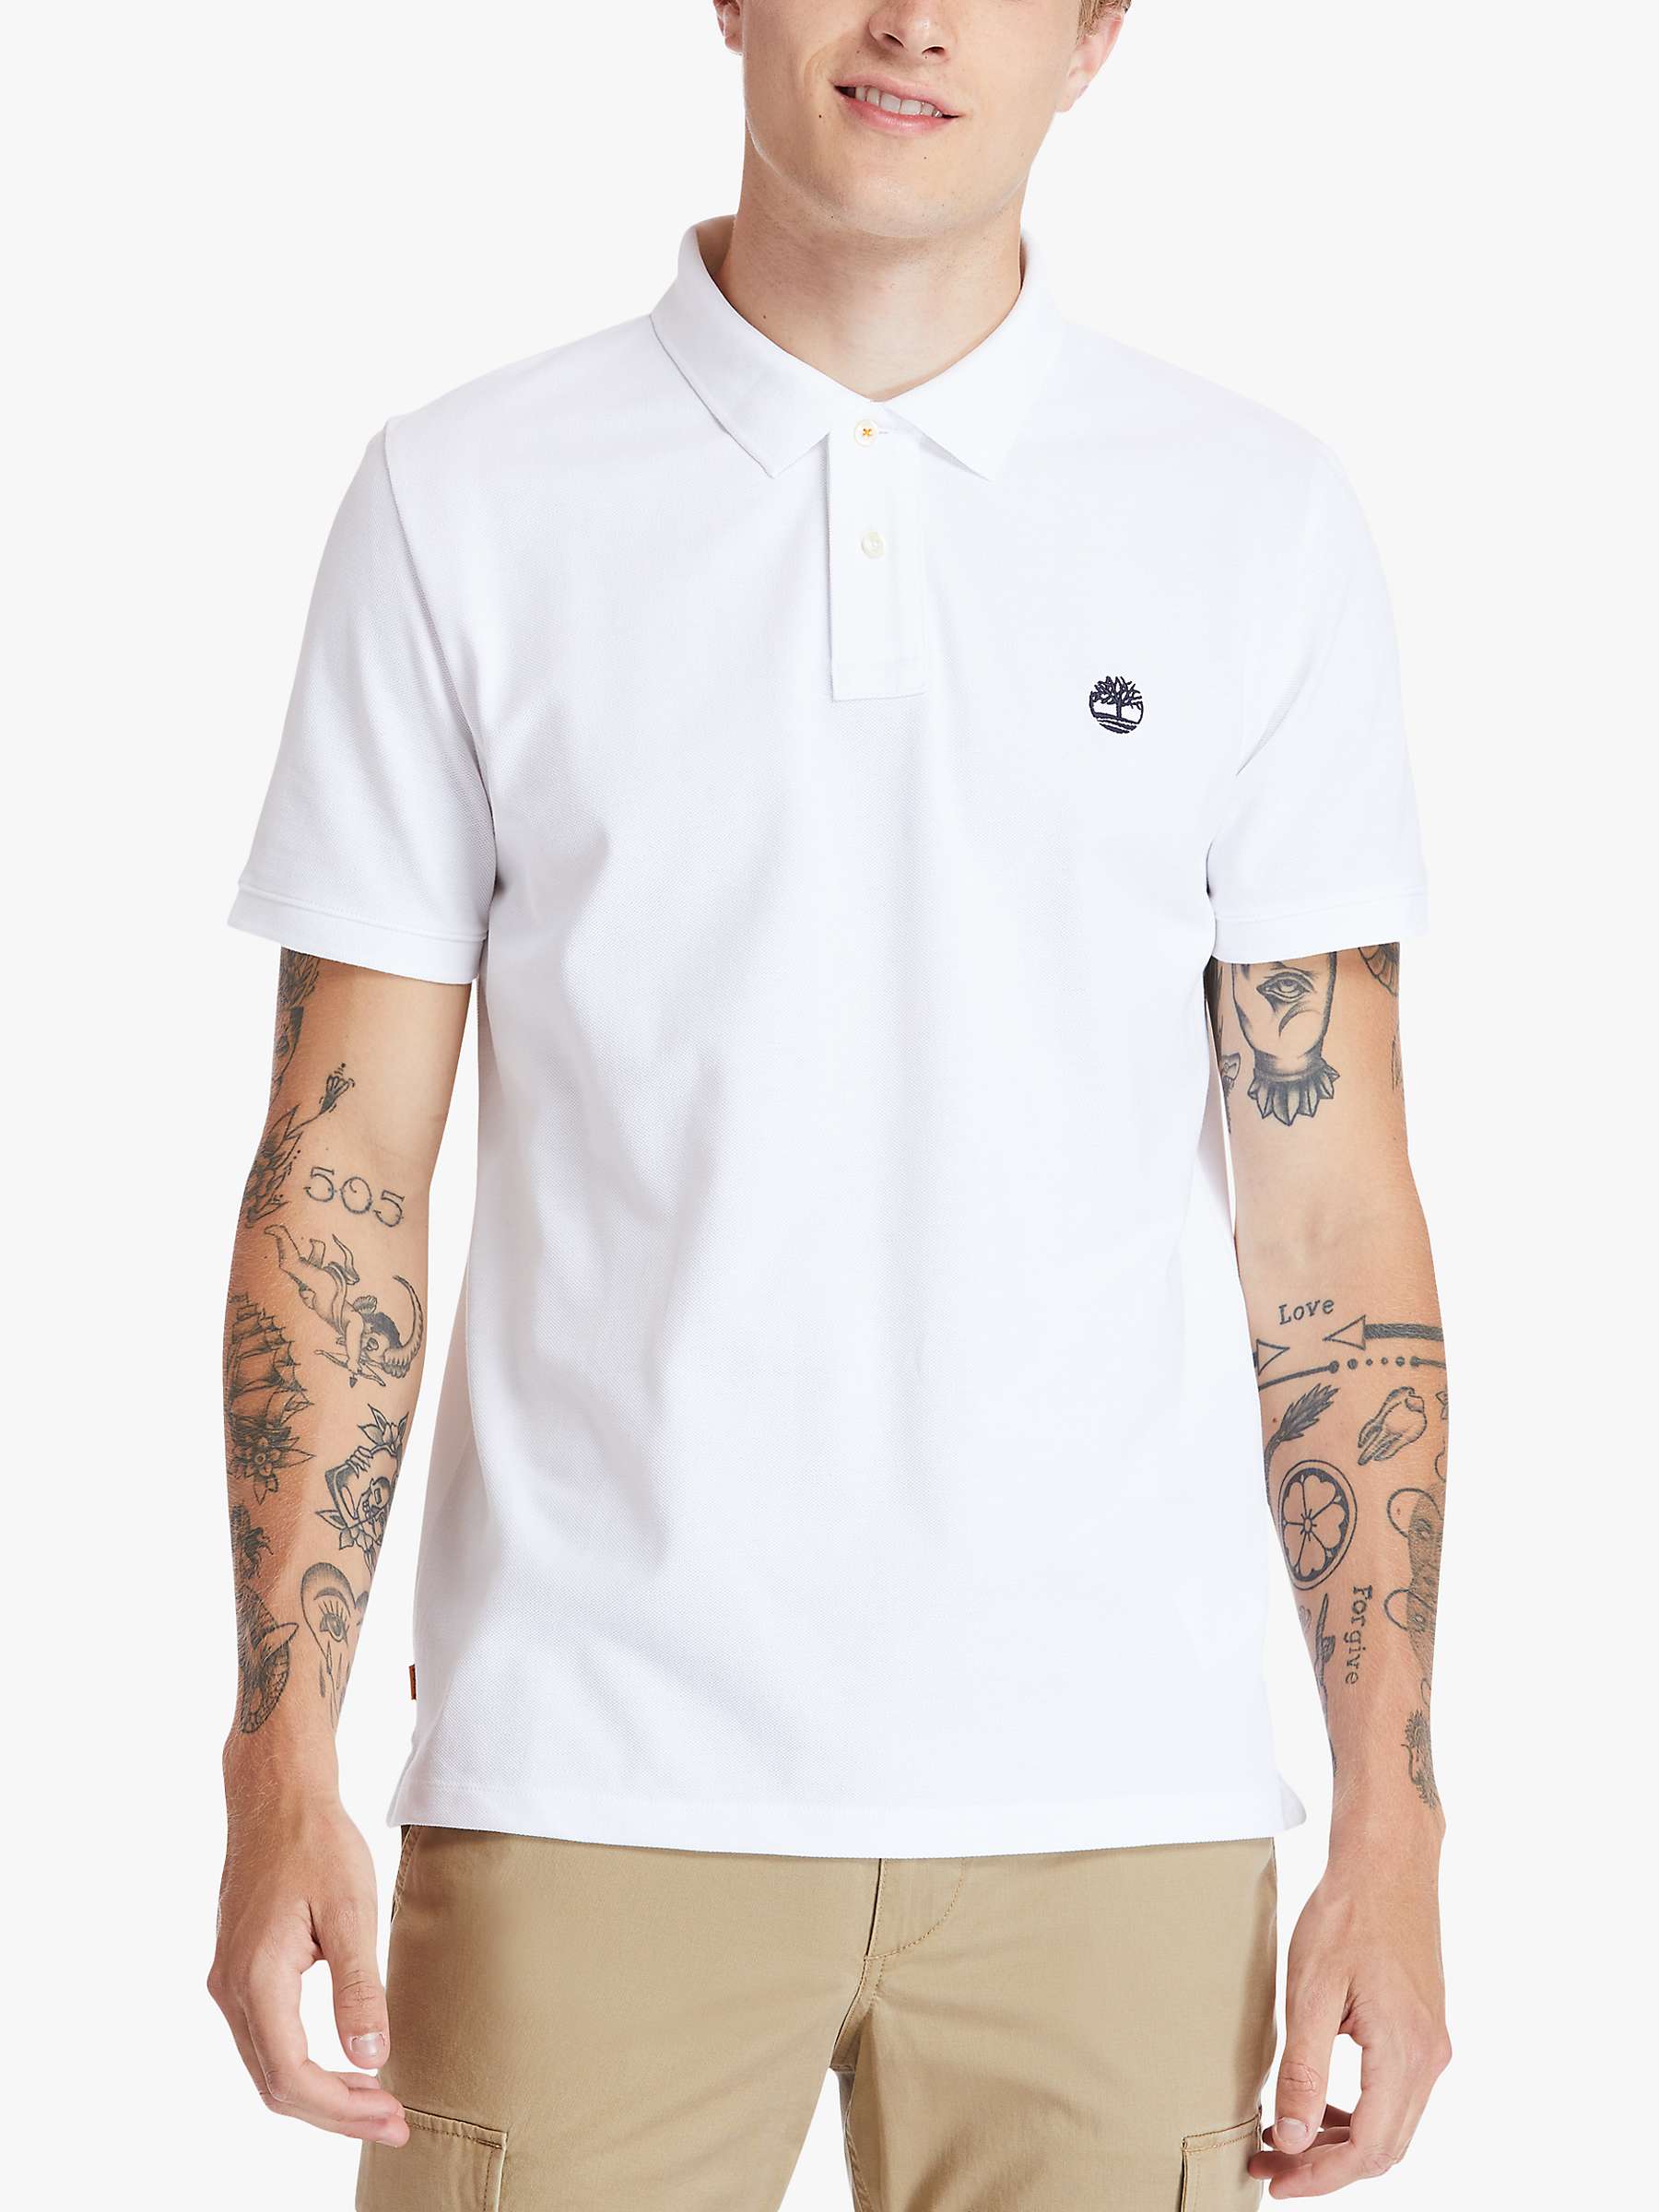 Buy Timberland Embroidered Logo Short Sleeve Polo Shirt Online at johnlewis.com